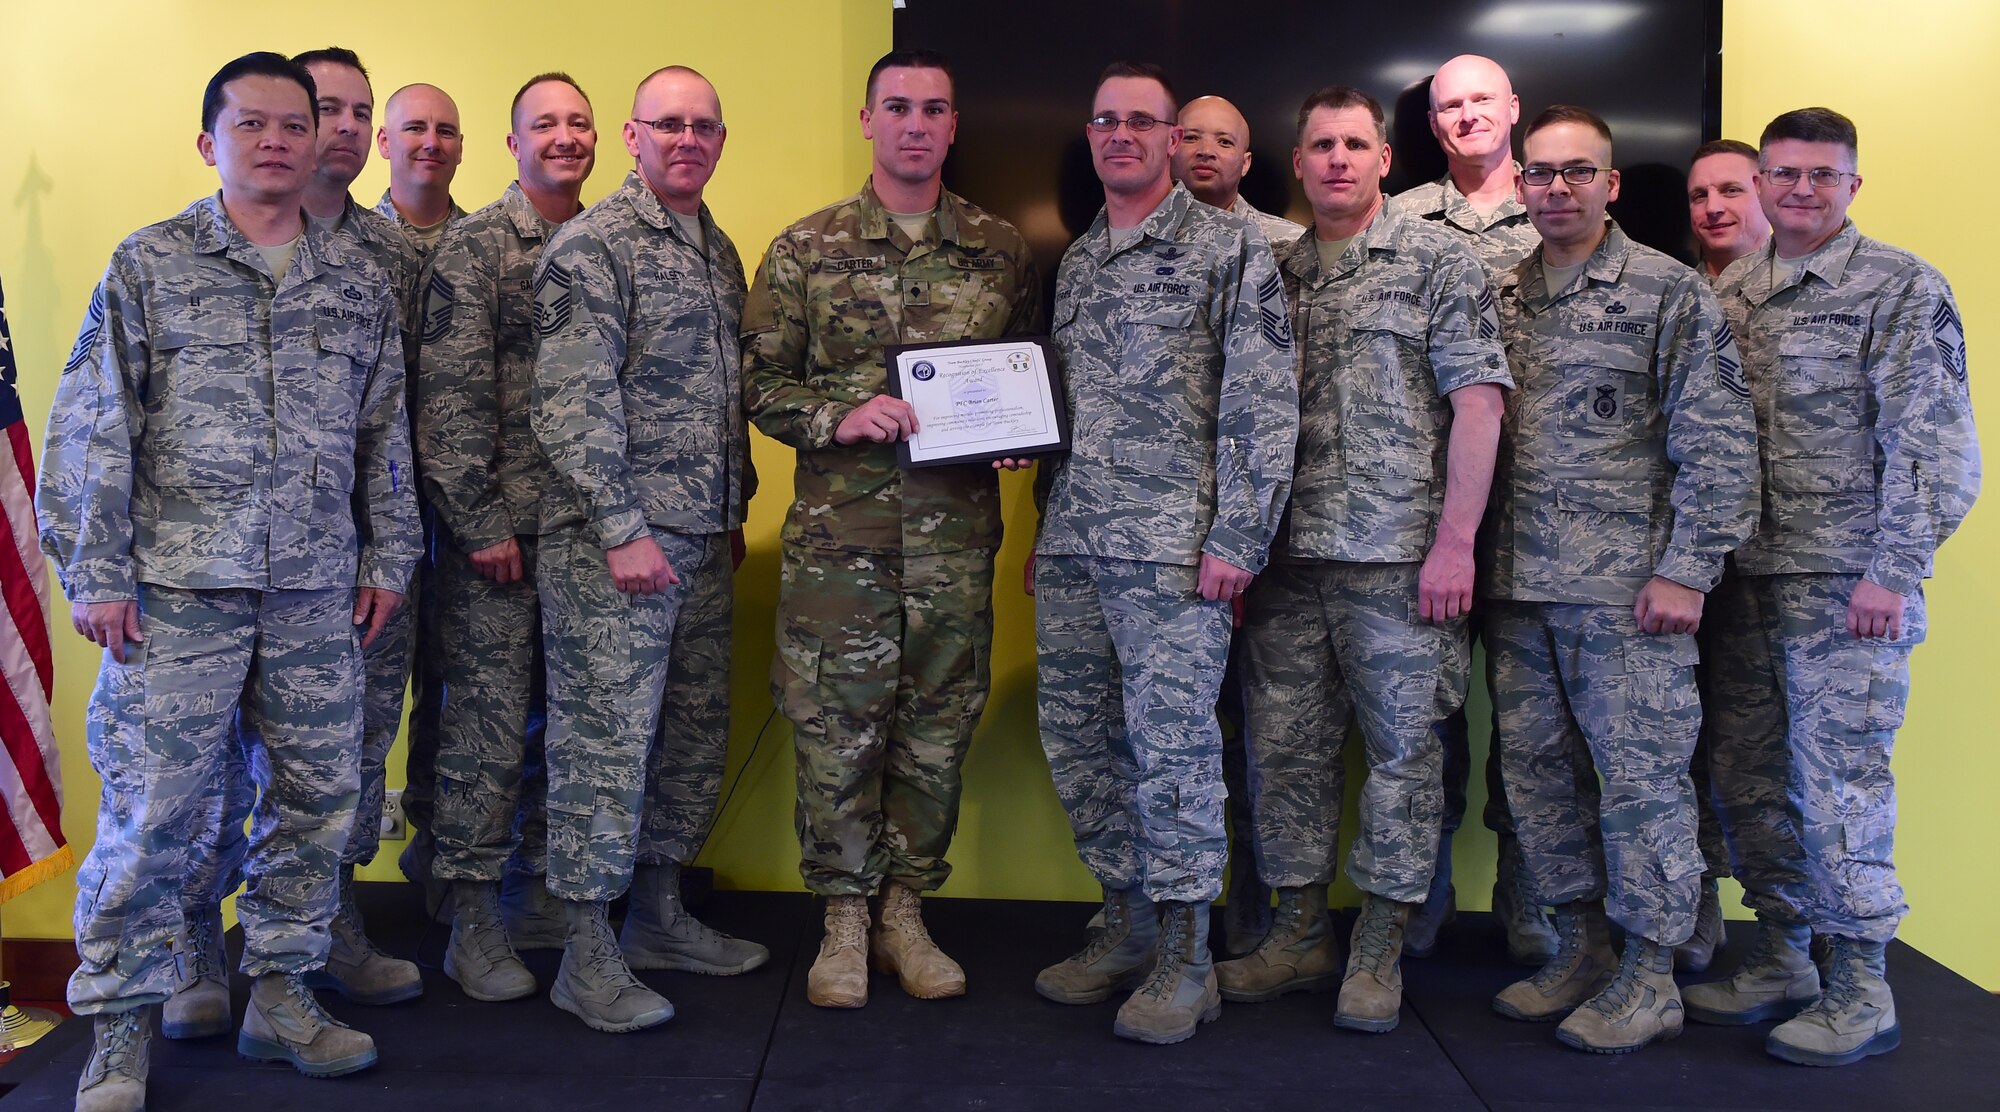 U.S. Army Spc. Brian Carter, 743d Military Intelligence Battalion analyst, stands with the Team Buckley Chief’s Group at the Panther Den Feb. 18, 2016, on Buckley Air Force Base, Colo. Carter exemplified excellence by taking on multiple leadership positions and providing fidelity on global weapon capability, which protected the nation’s warfighters in three areas of responsibilities. (U.S. Air Force photo by Senior Airman Racheal E. Watson/Released)